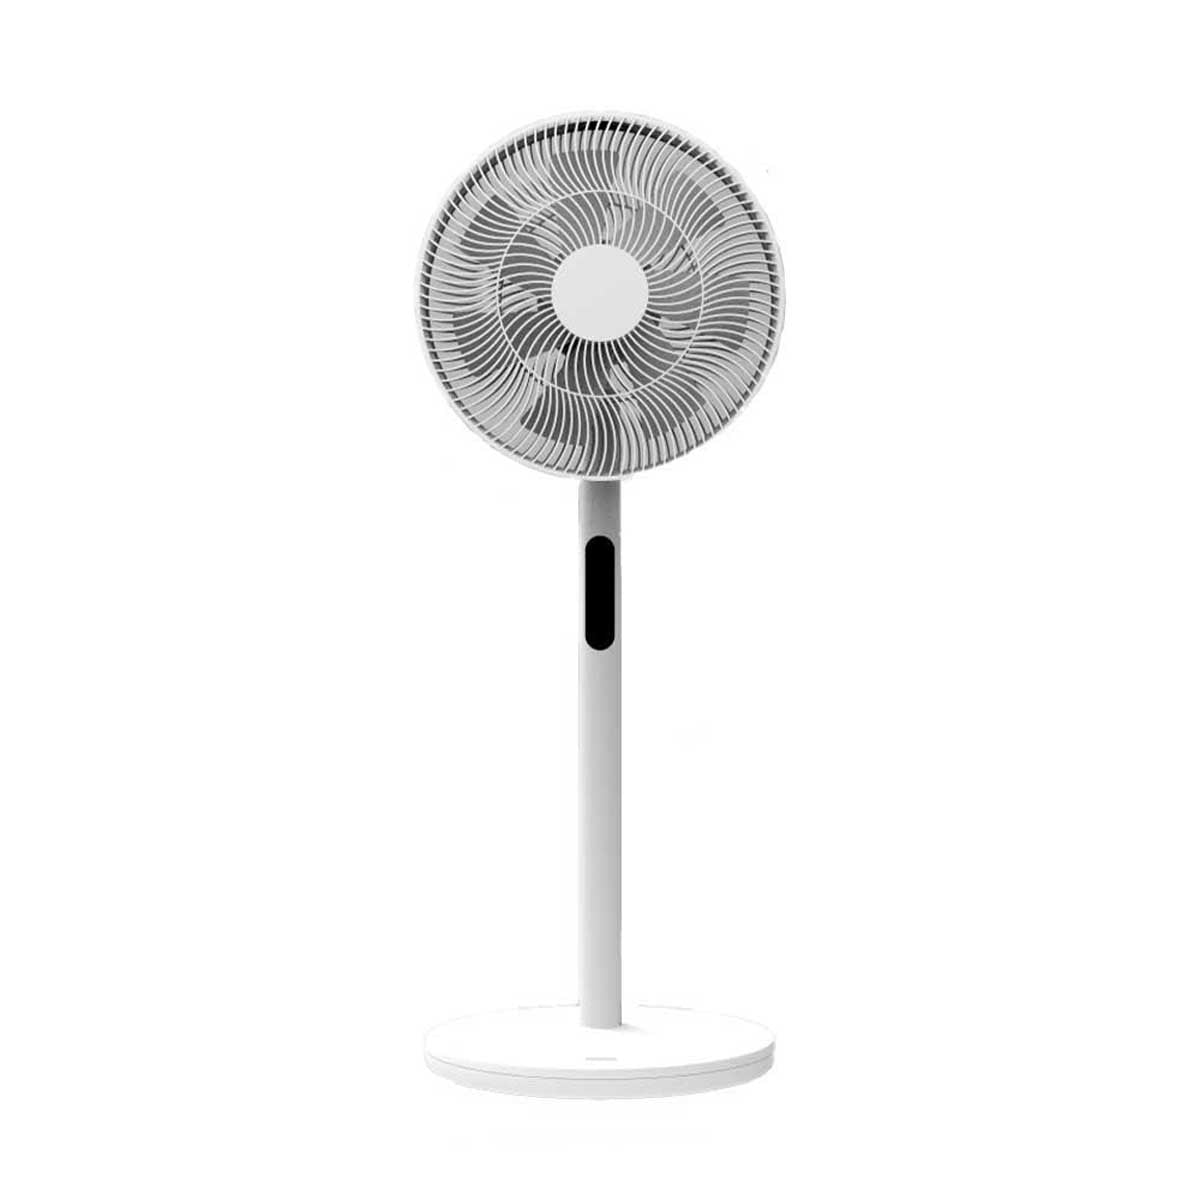 WELLY design silent pedestal fan with remote control and LED display and timer